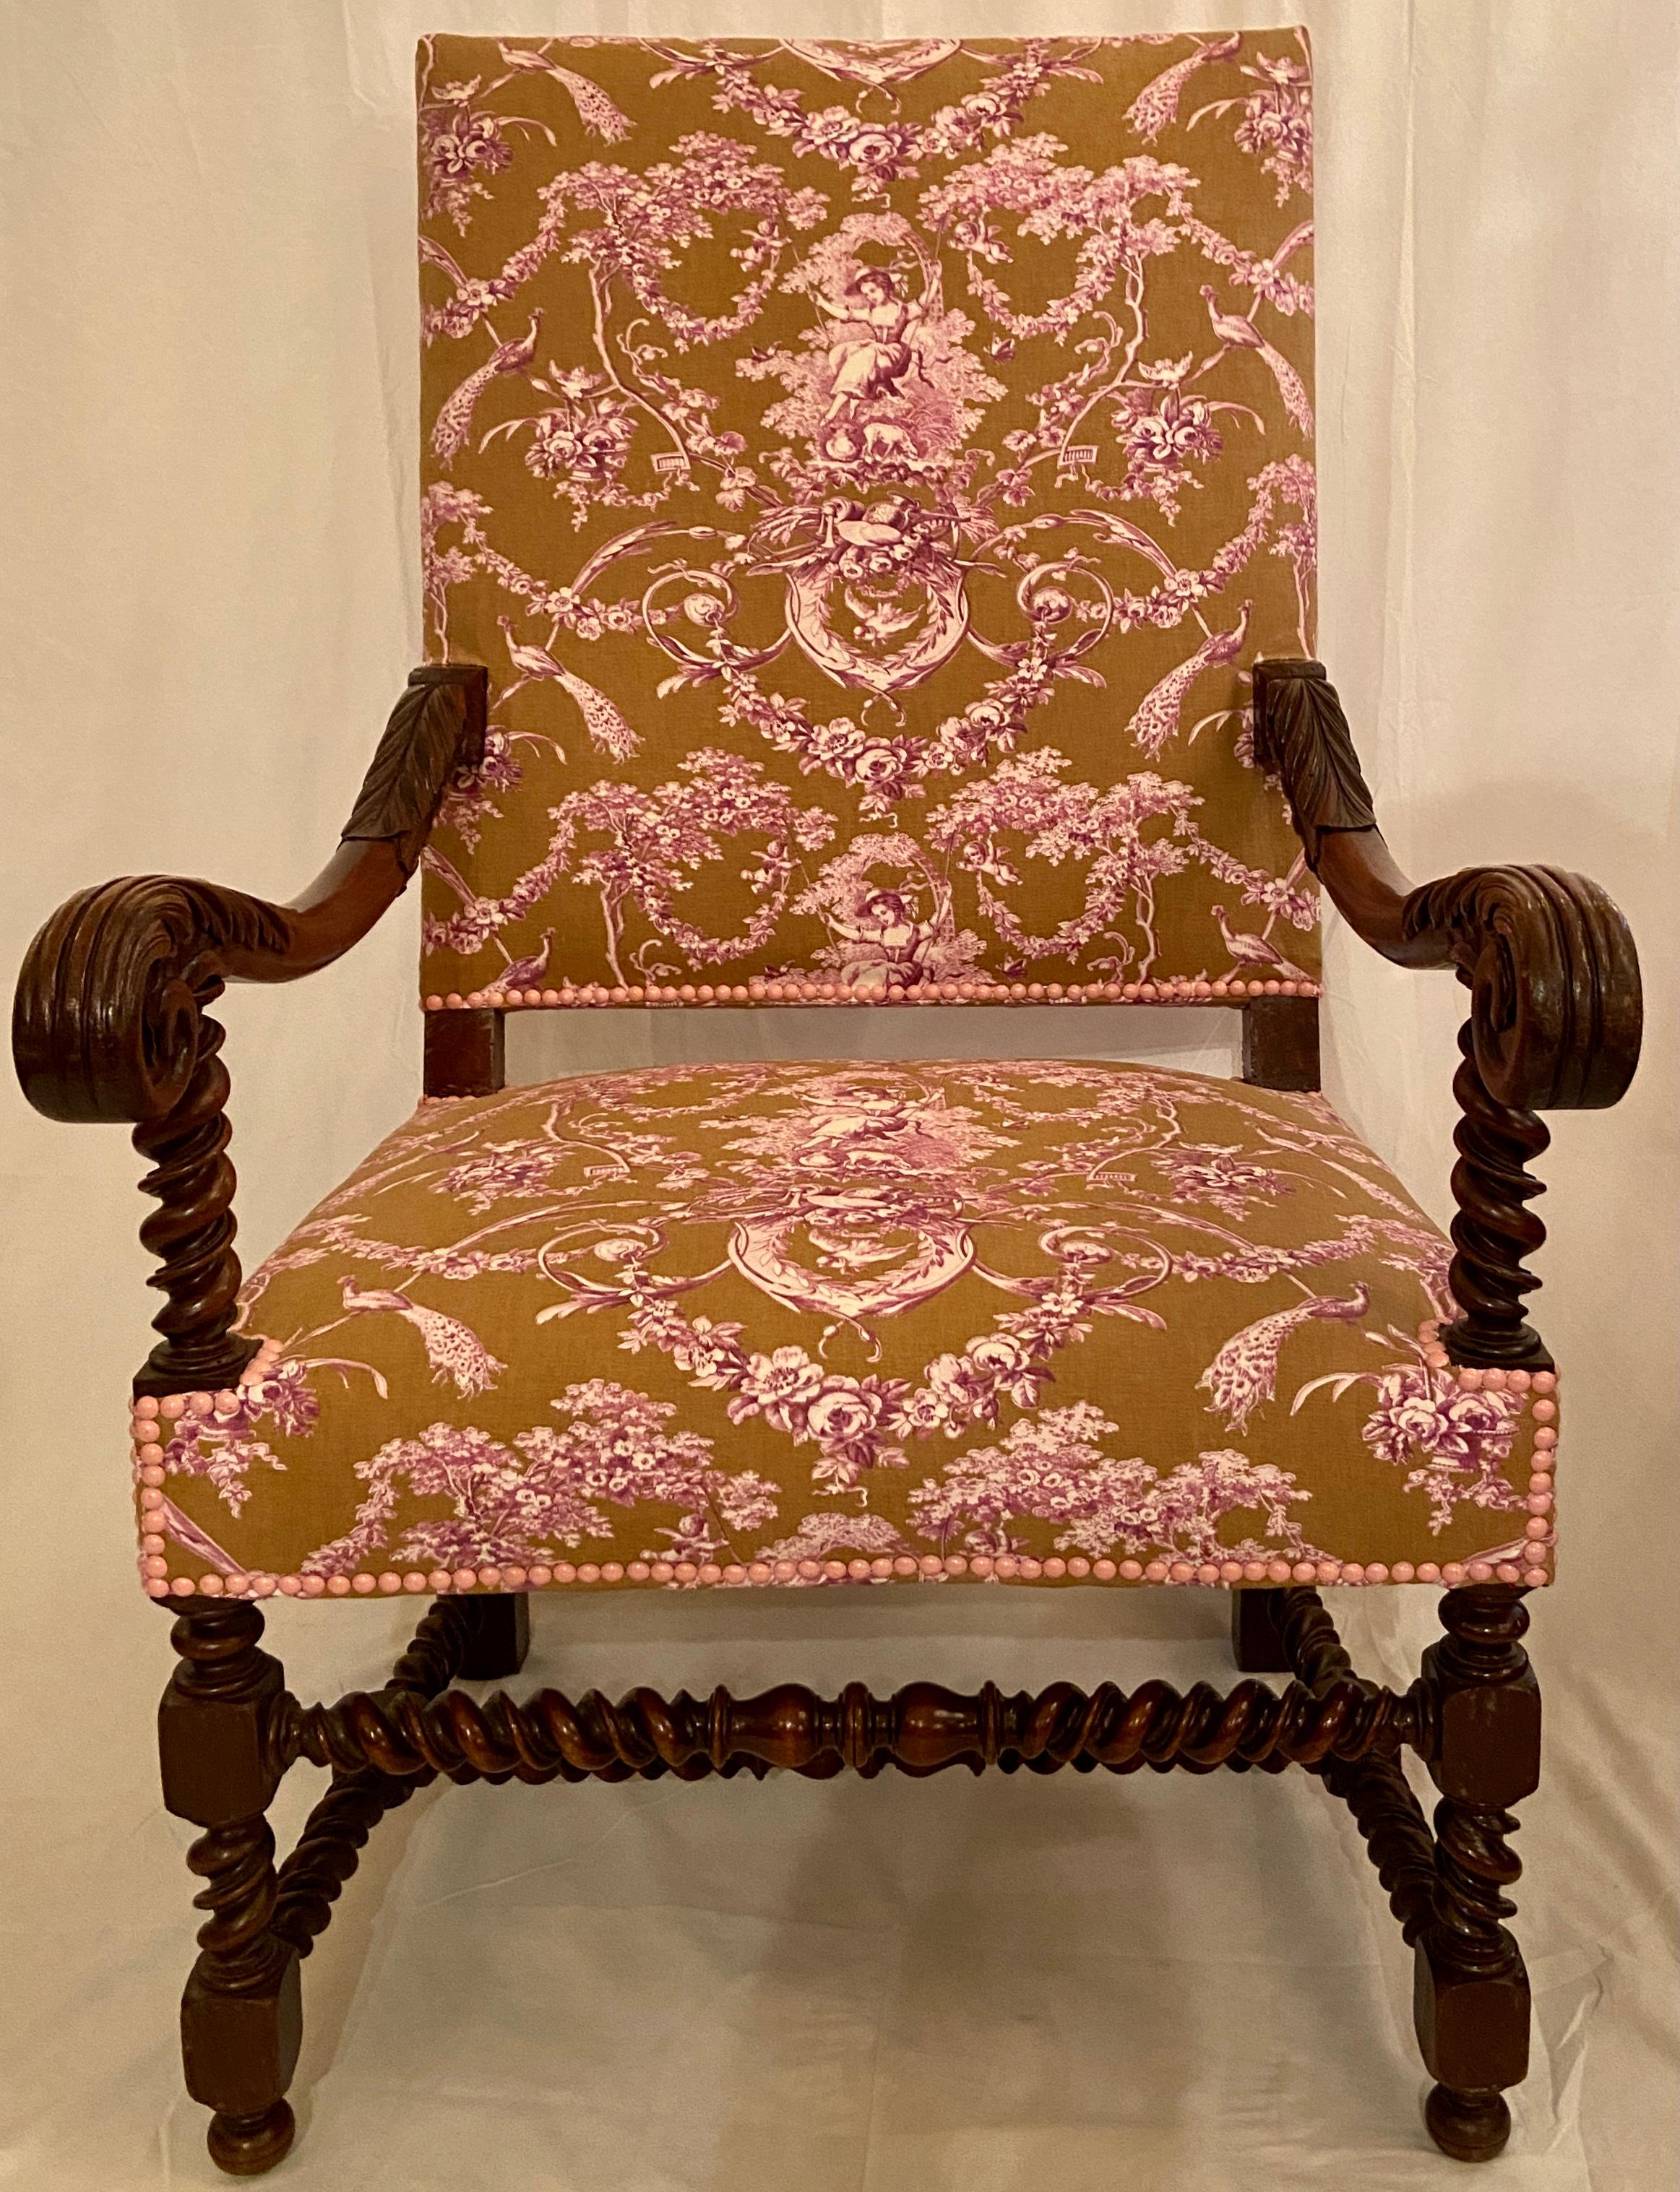 Pair Antique French Francois I carved walnut & toile armchairs, circa 1860.
These handsome chairs are in great condition with a very pretty fabric.